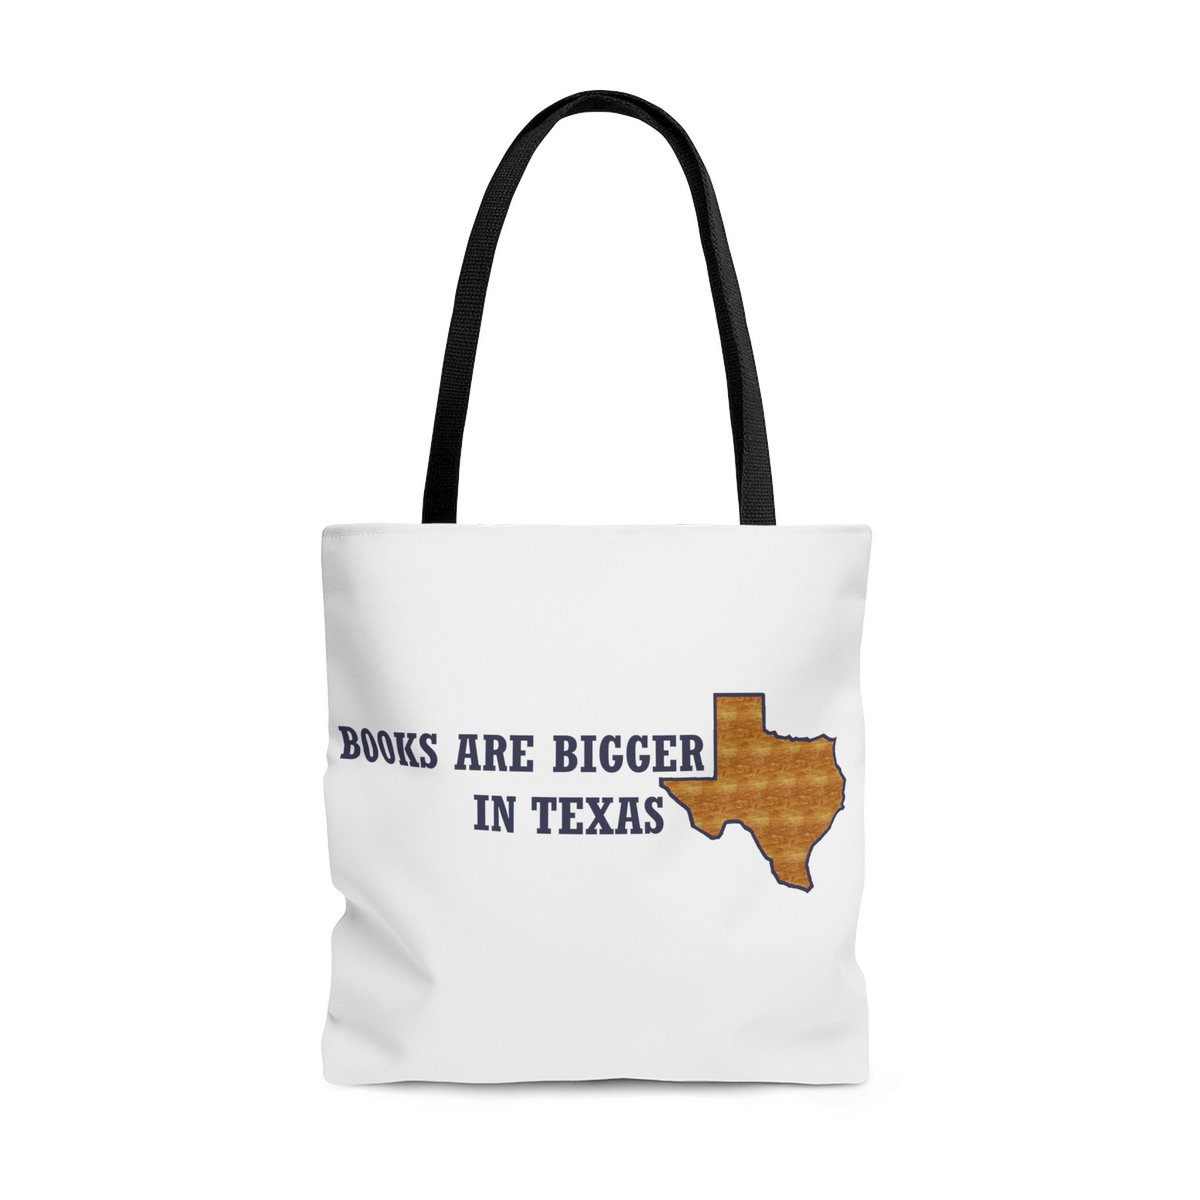 Things are bigger in Texas. 
Including books!

'Books are Bigger in Texas' Tote Bag - buff.ly/2FxcJFQ

#texas #readers #writers #books #bookworm #biggerintexas #texaswriters #texasauthors #texaspoets #bookbag #lonestar #gifts